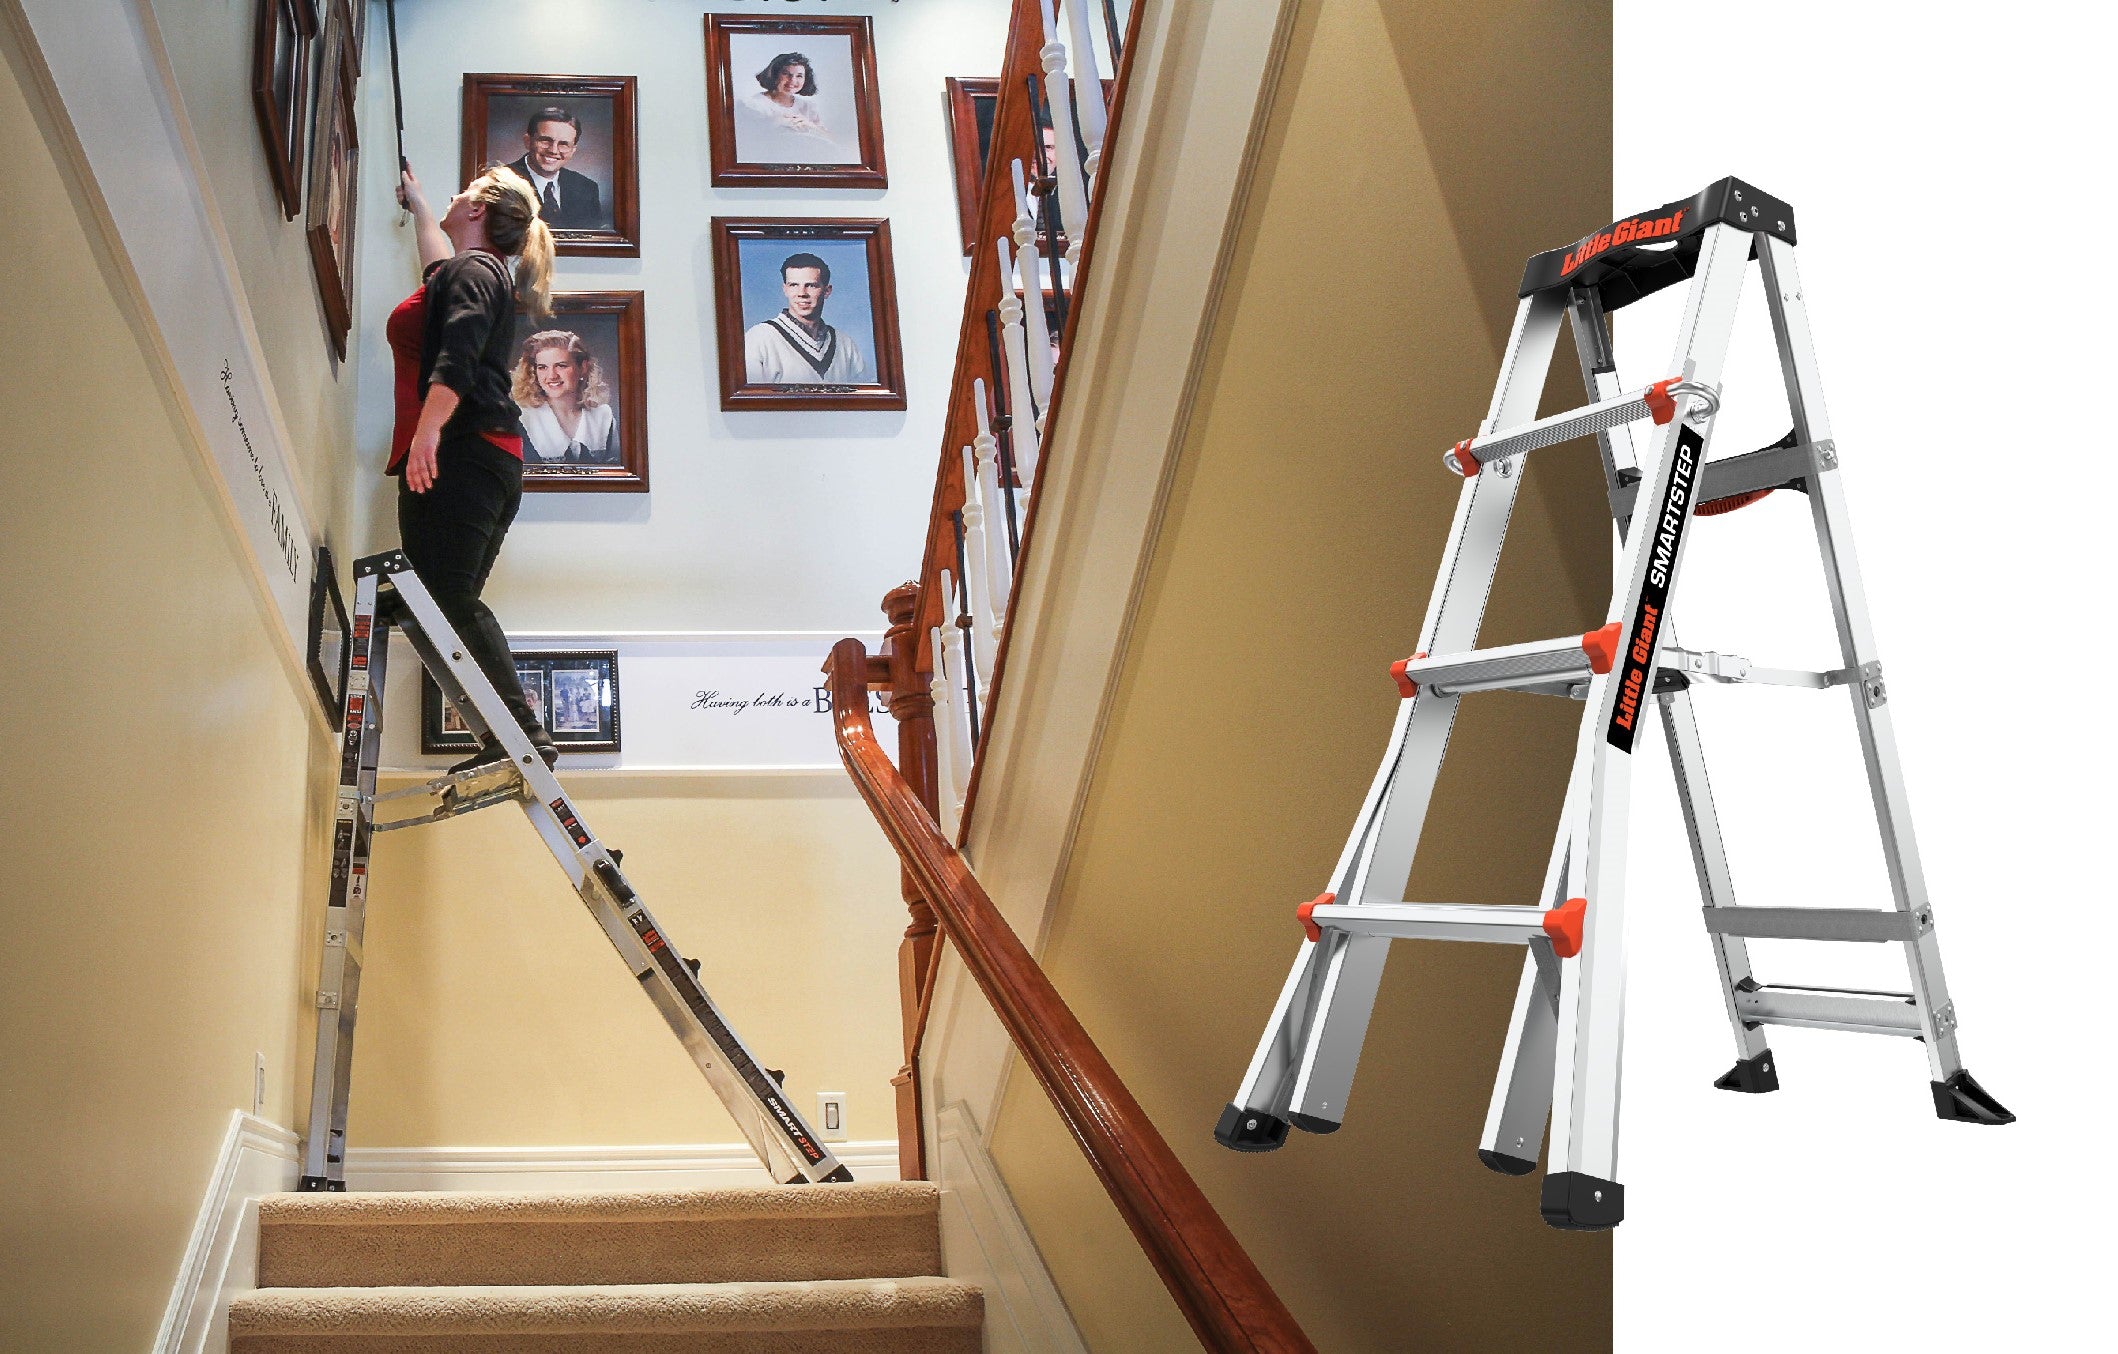 A women on a ladder cleaning walls in a house